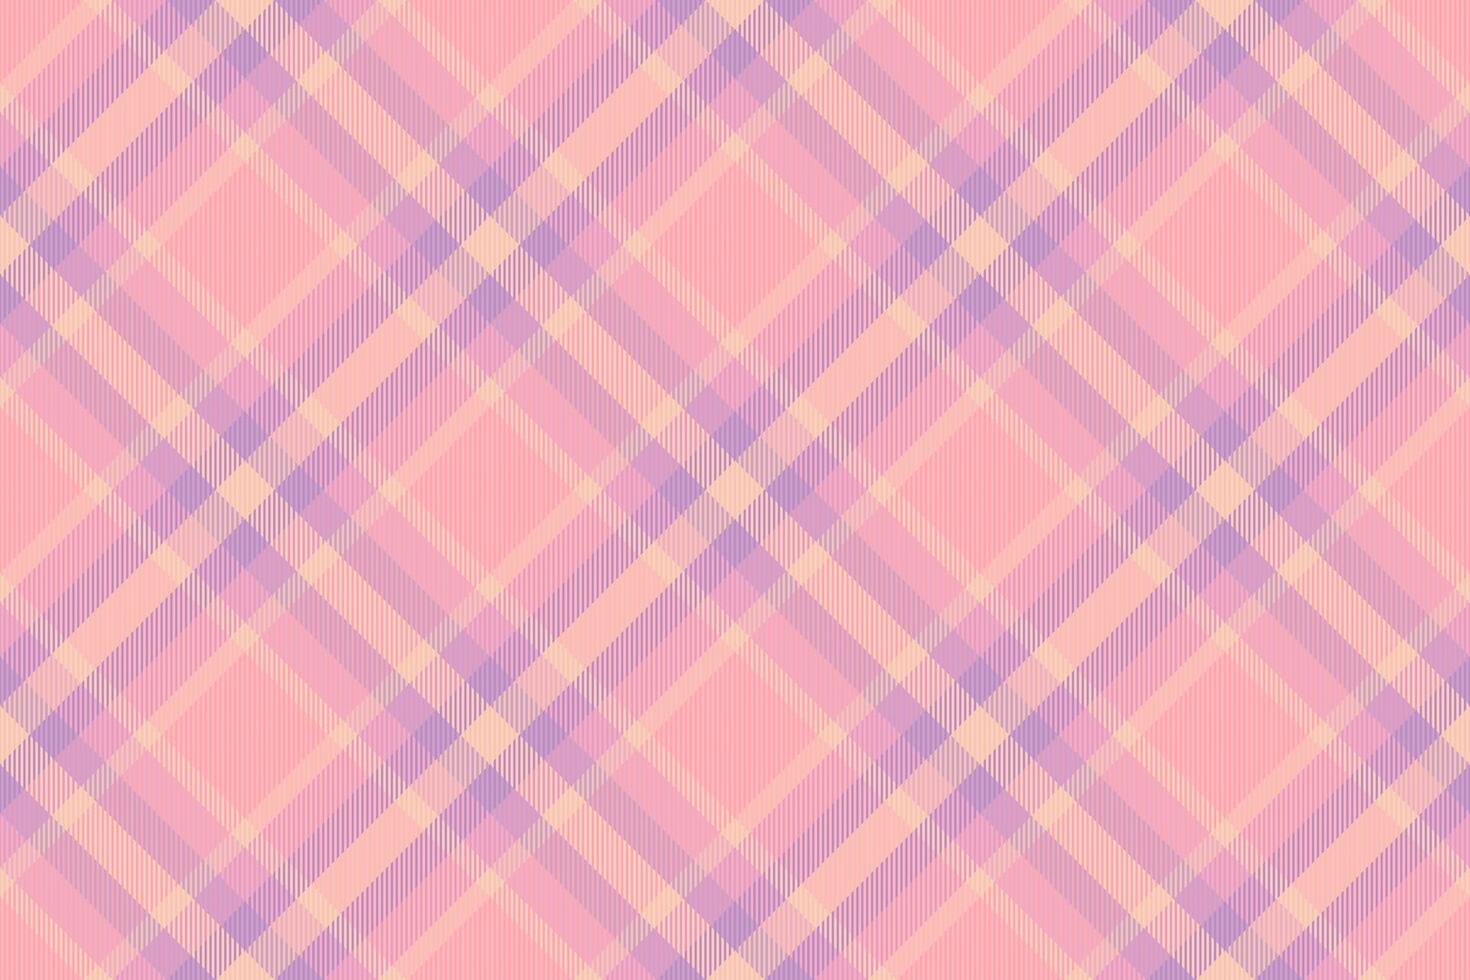 Free texture tartan, open pattern seamless background. Lined check textile fabric plaid in light and pastel colors. vector